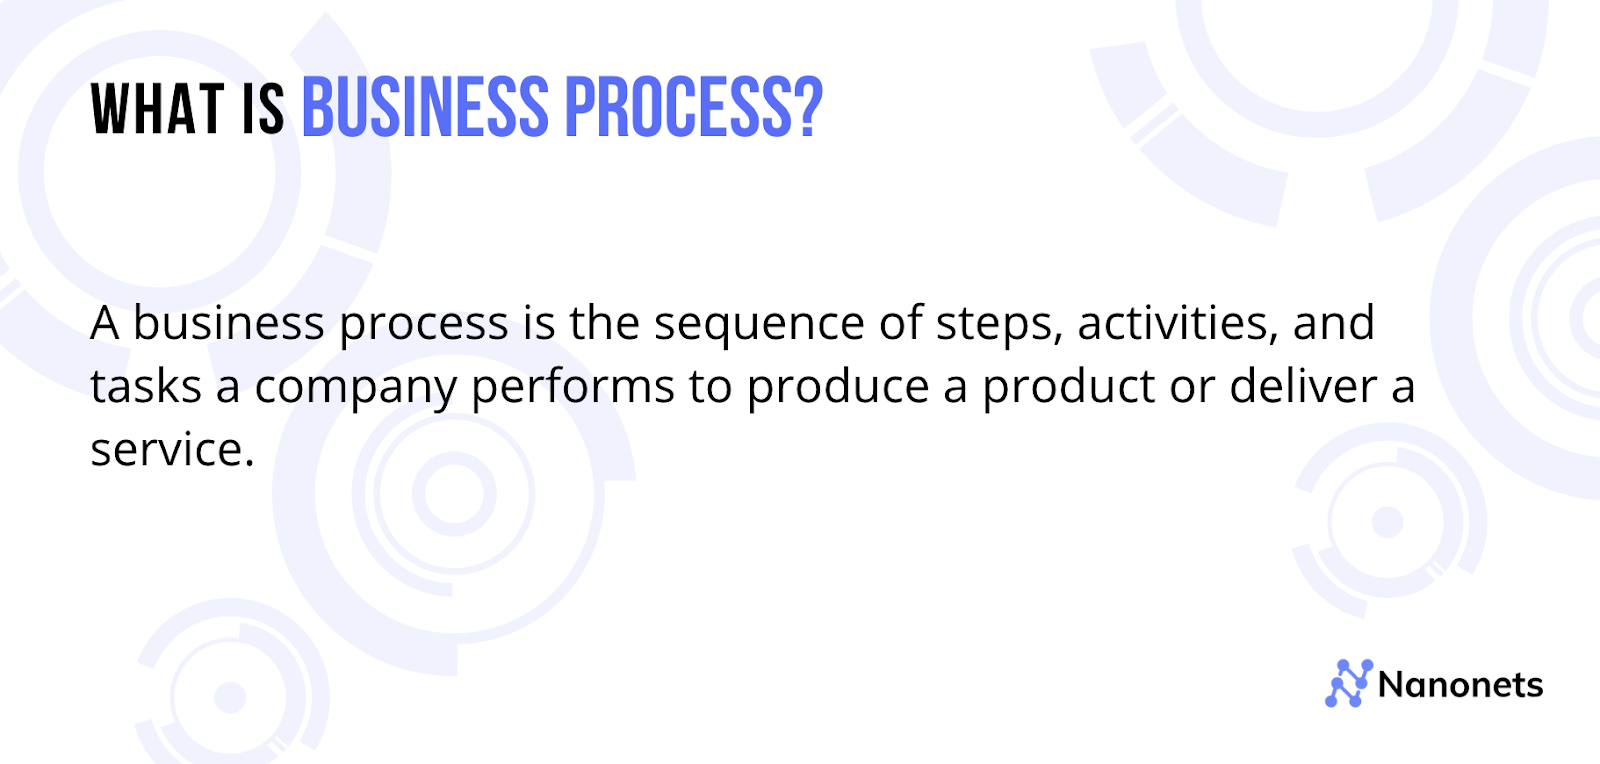 What is a business process?